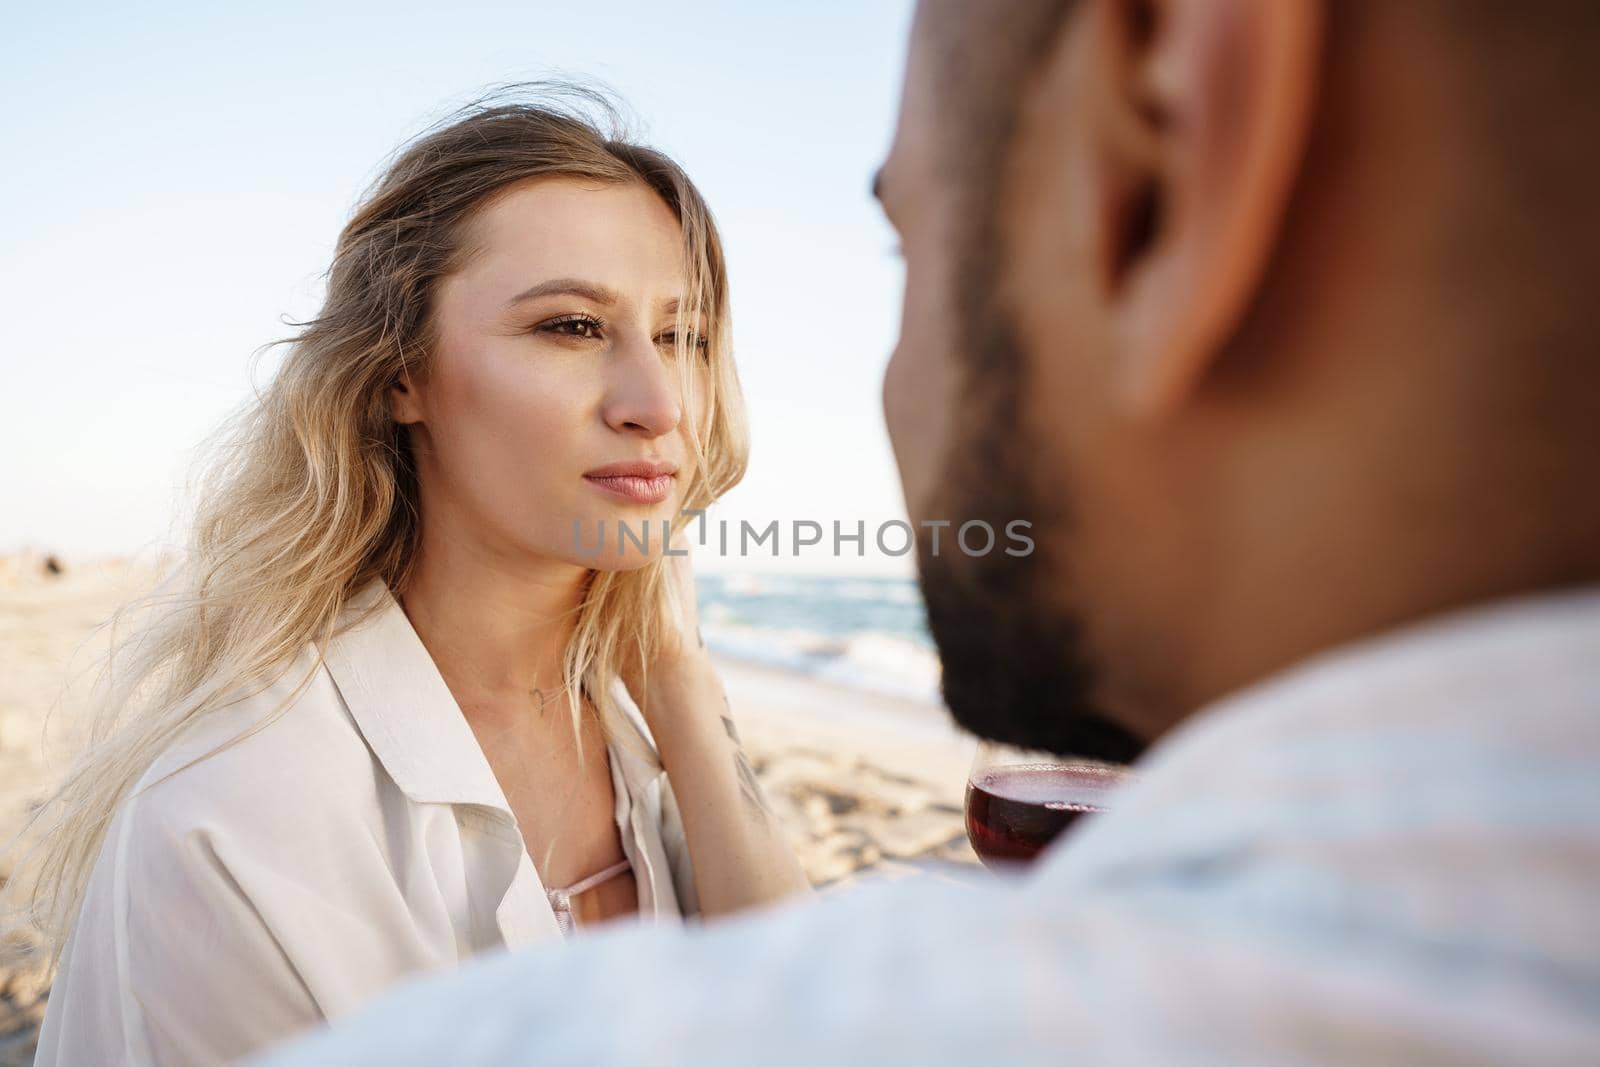 Portrait of a young couple sitting on the beach and drinking wine, close up